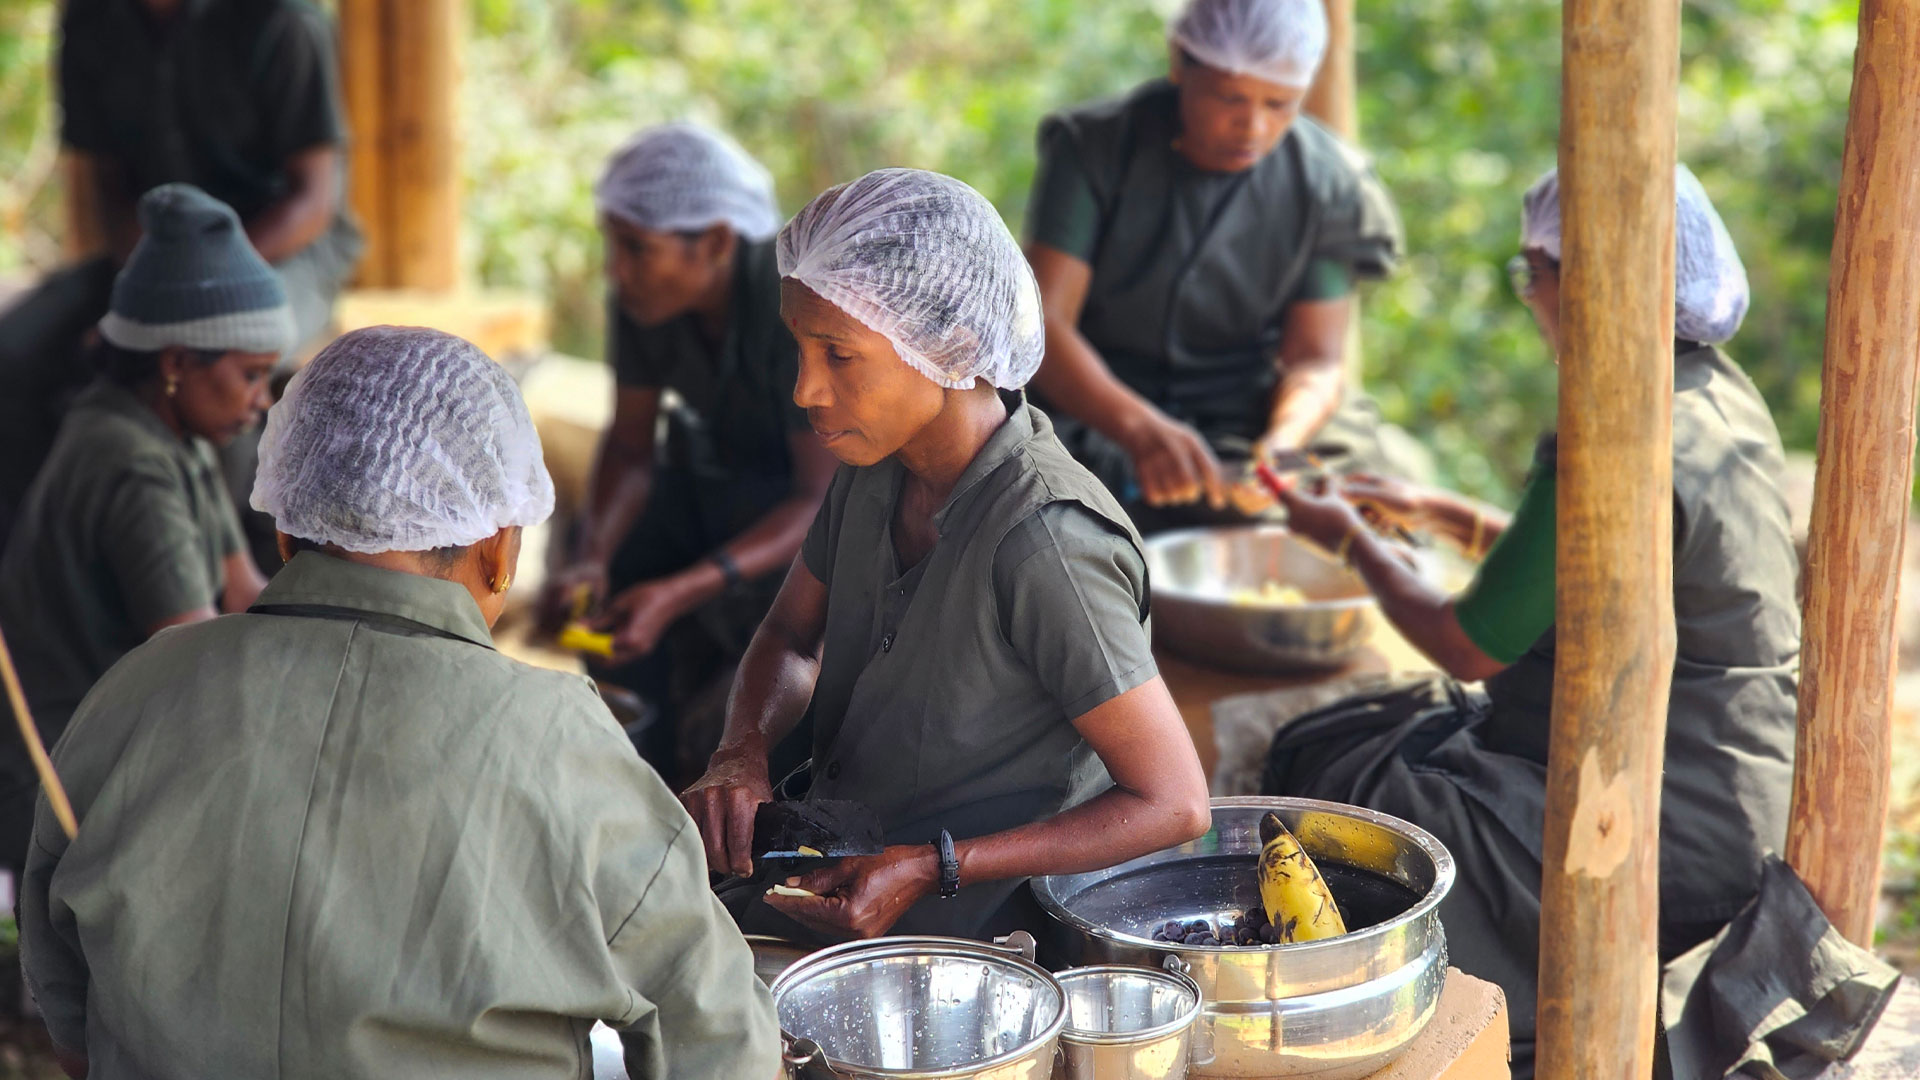 A group of people wearing hair nets peeling food representing the ‘Food from the Forest’ initiative, which promotes the traditional food systems of the indigenous Kani community